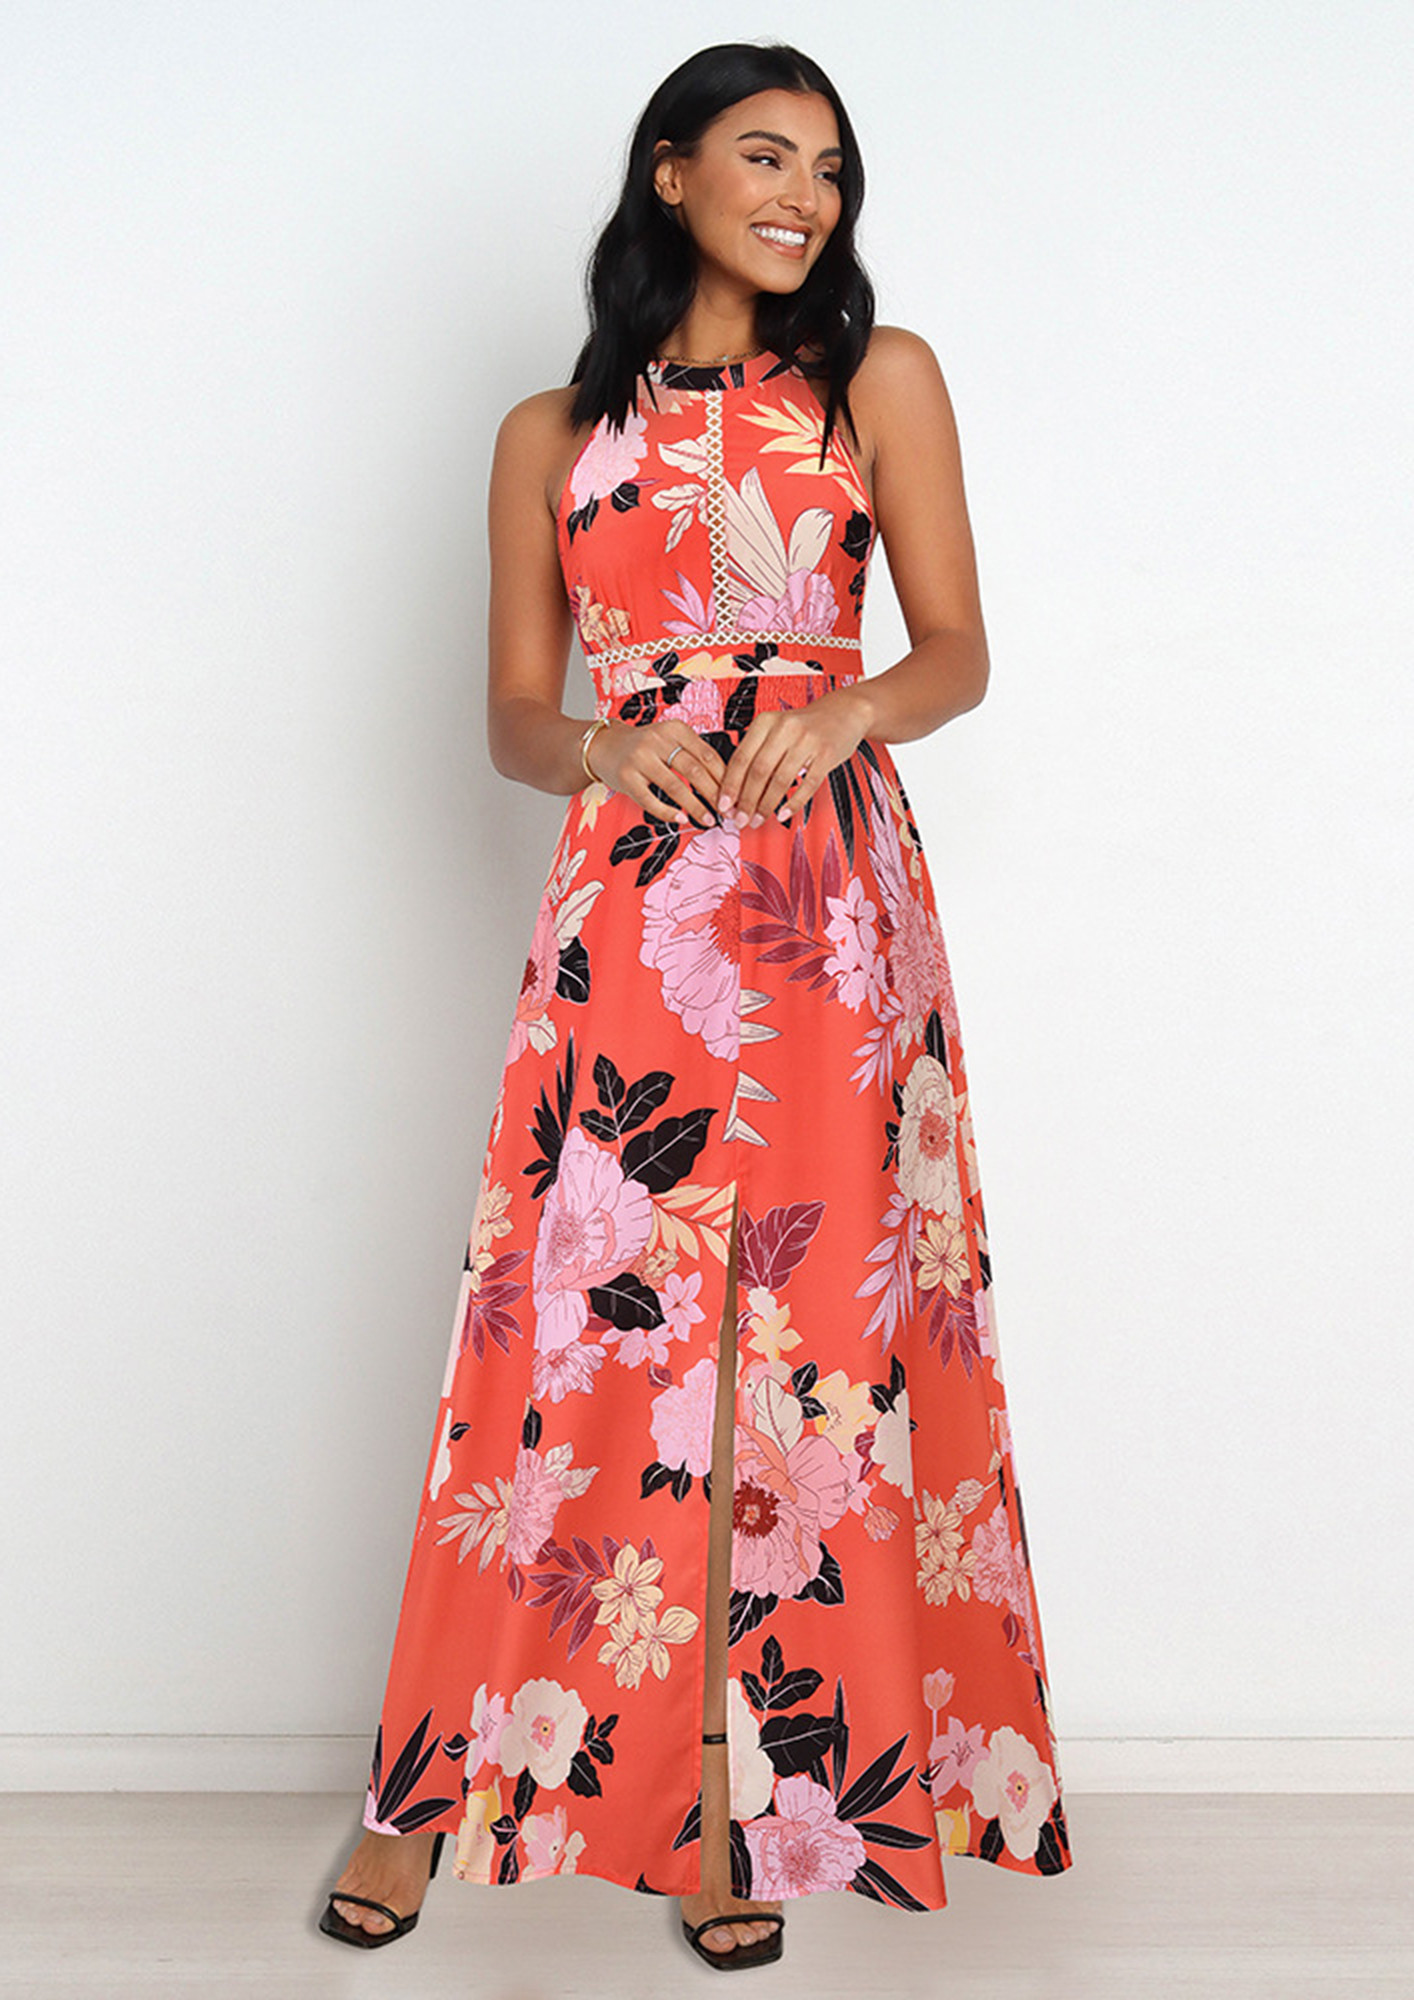 BLOOMING HIGH RED FLORAL DRESS